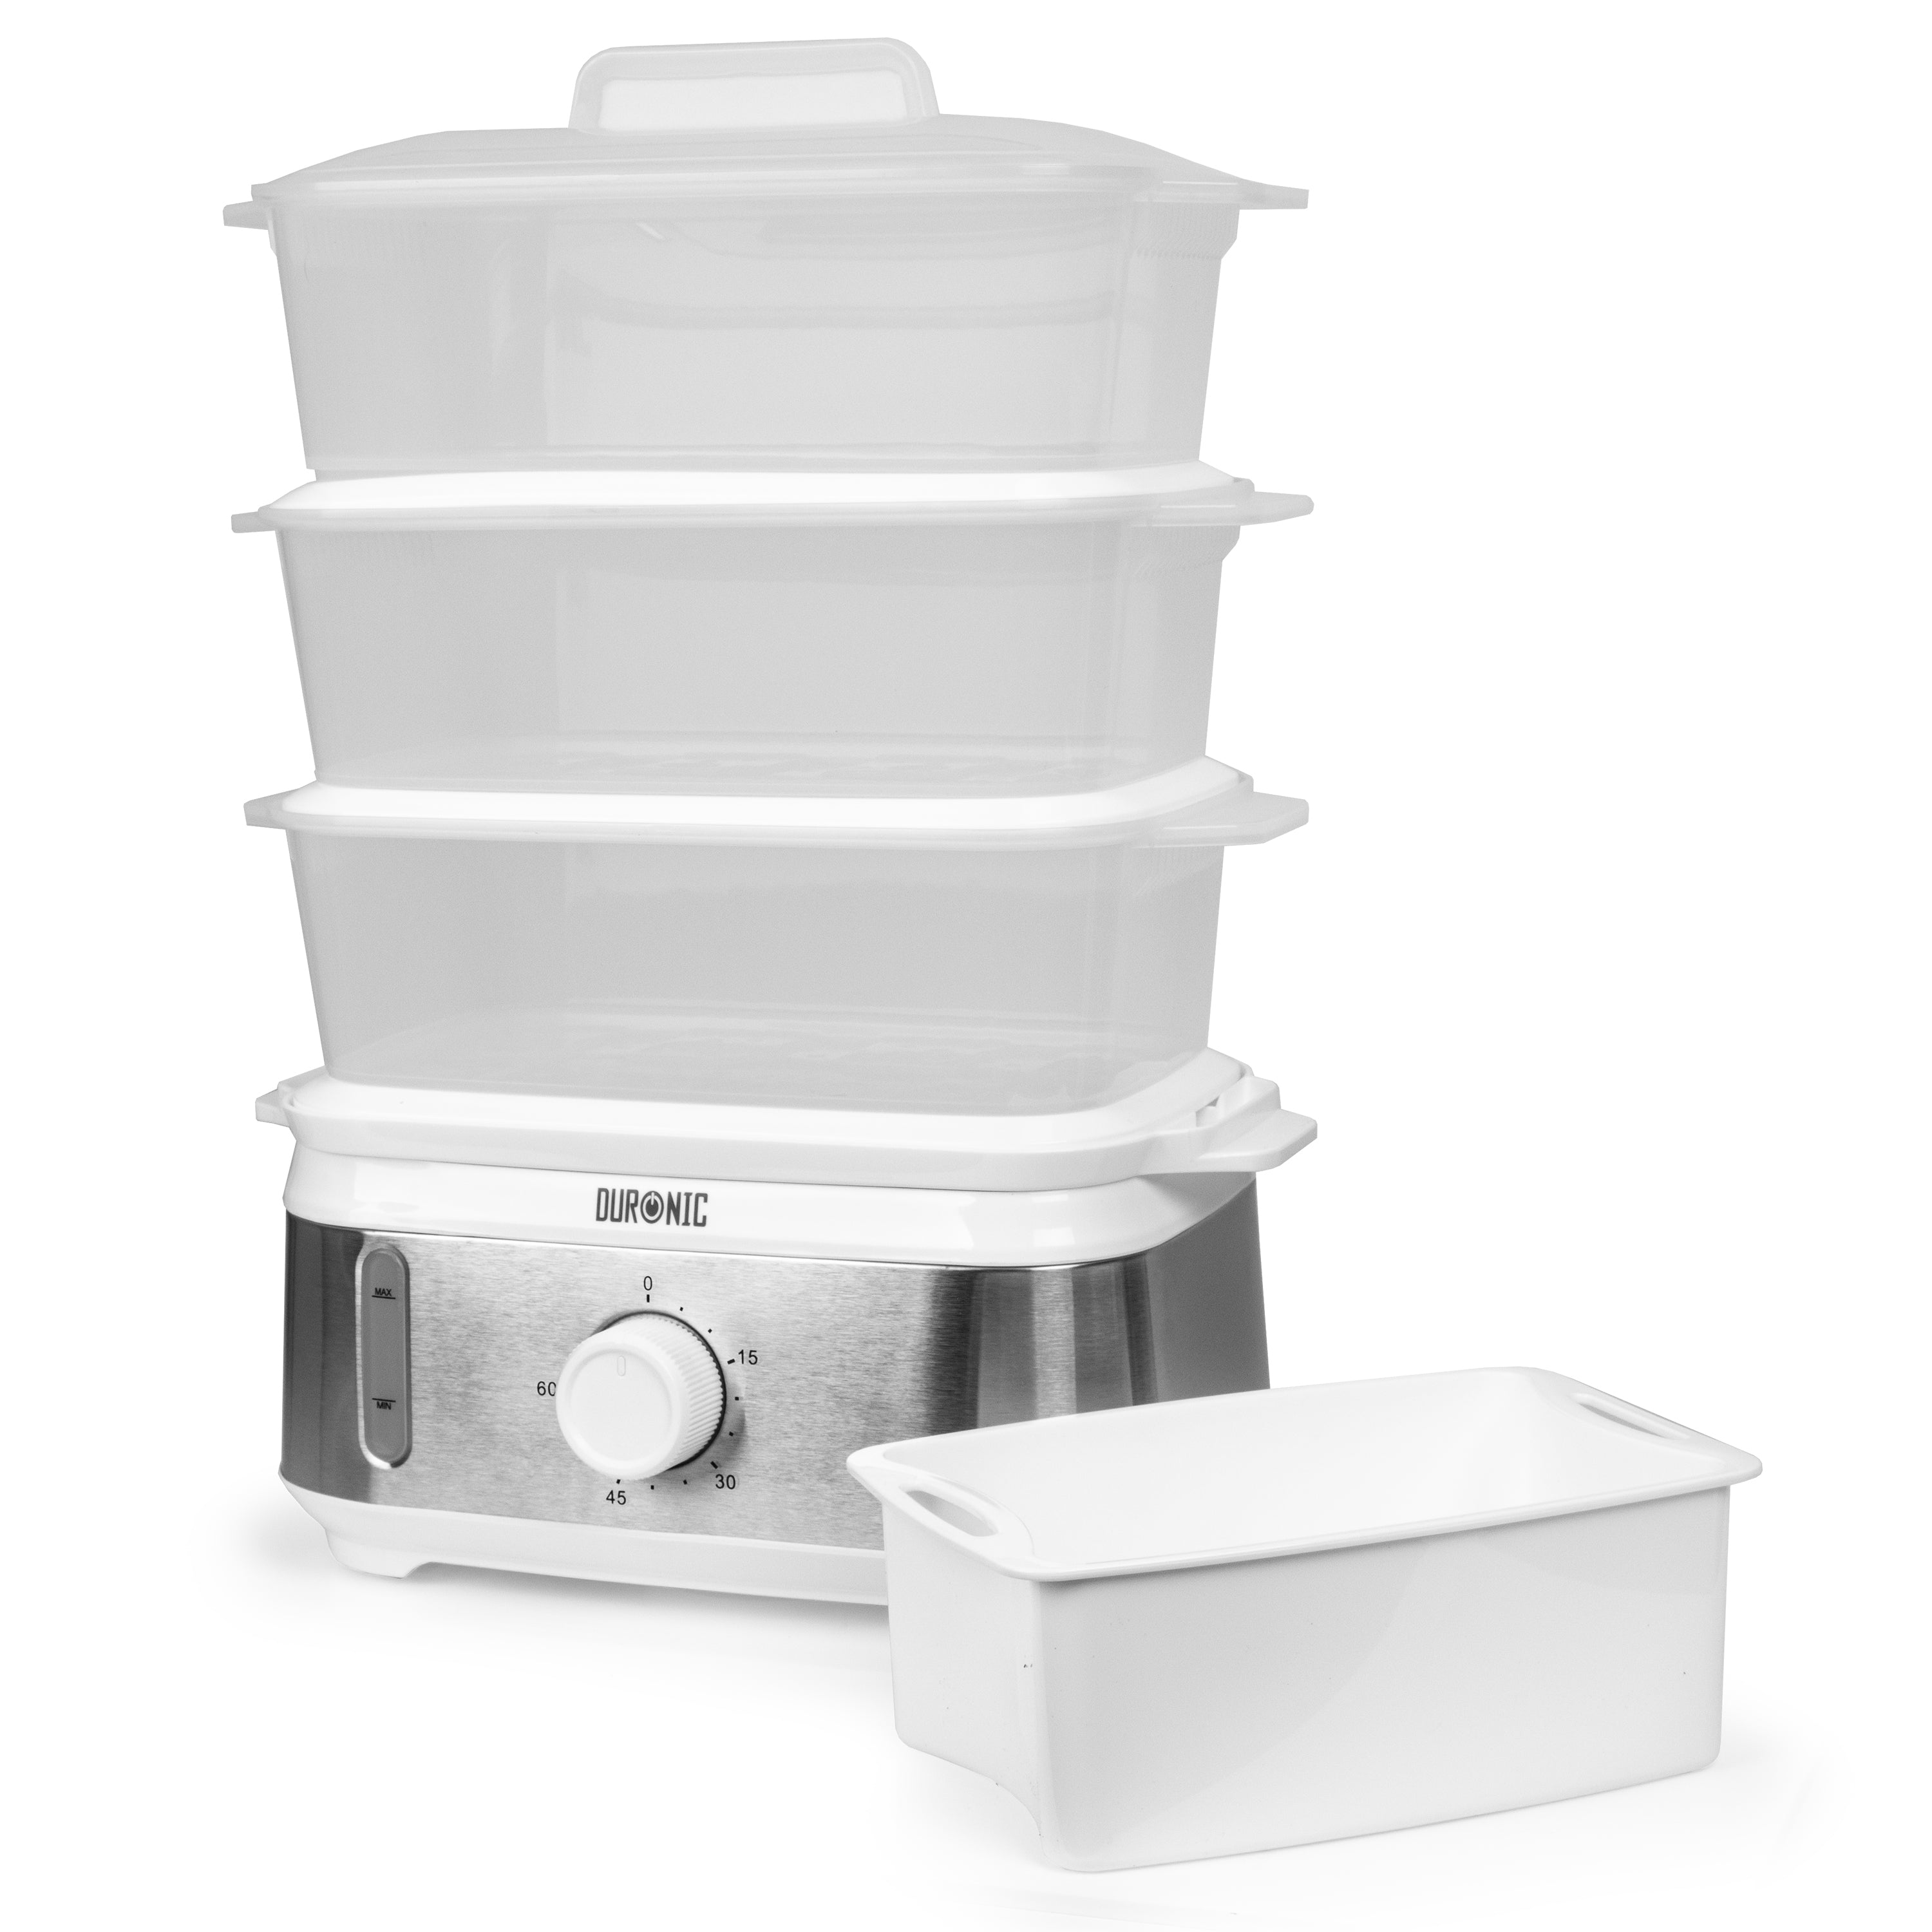 Are food steamers worth it?: A Deep Dive into Steaming with the Duronic FS95 Food Steamer